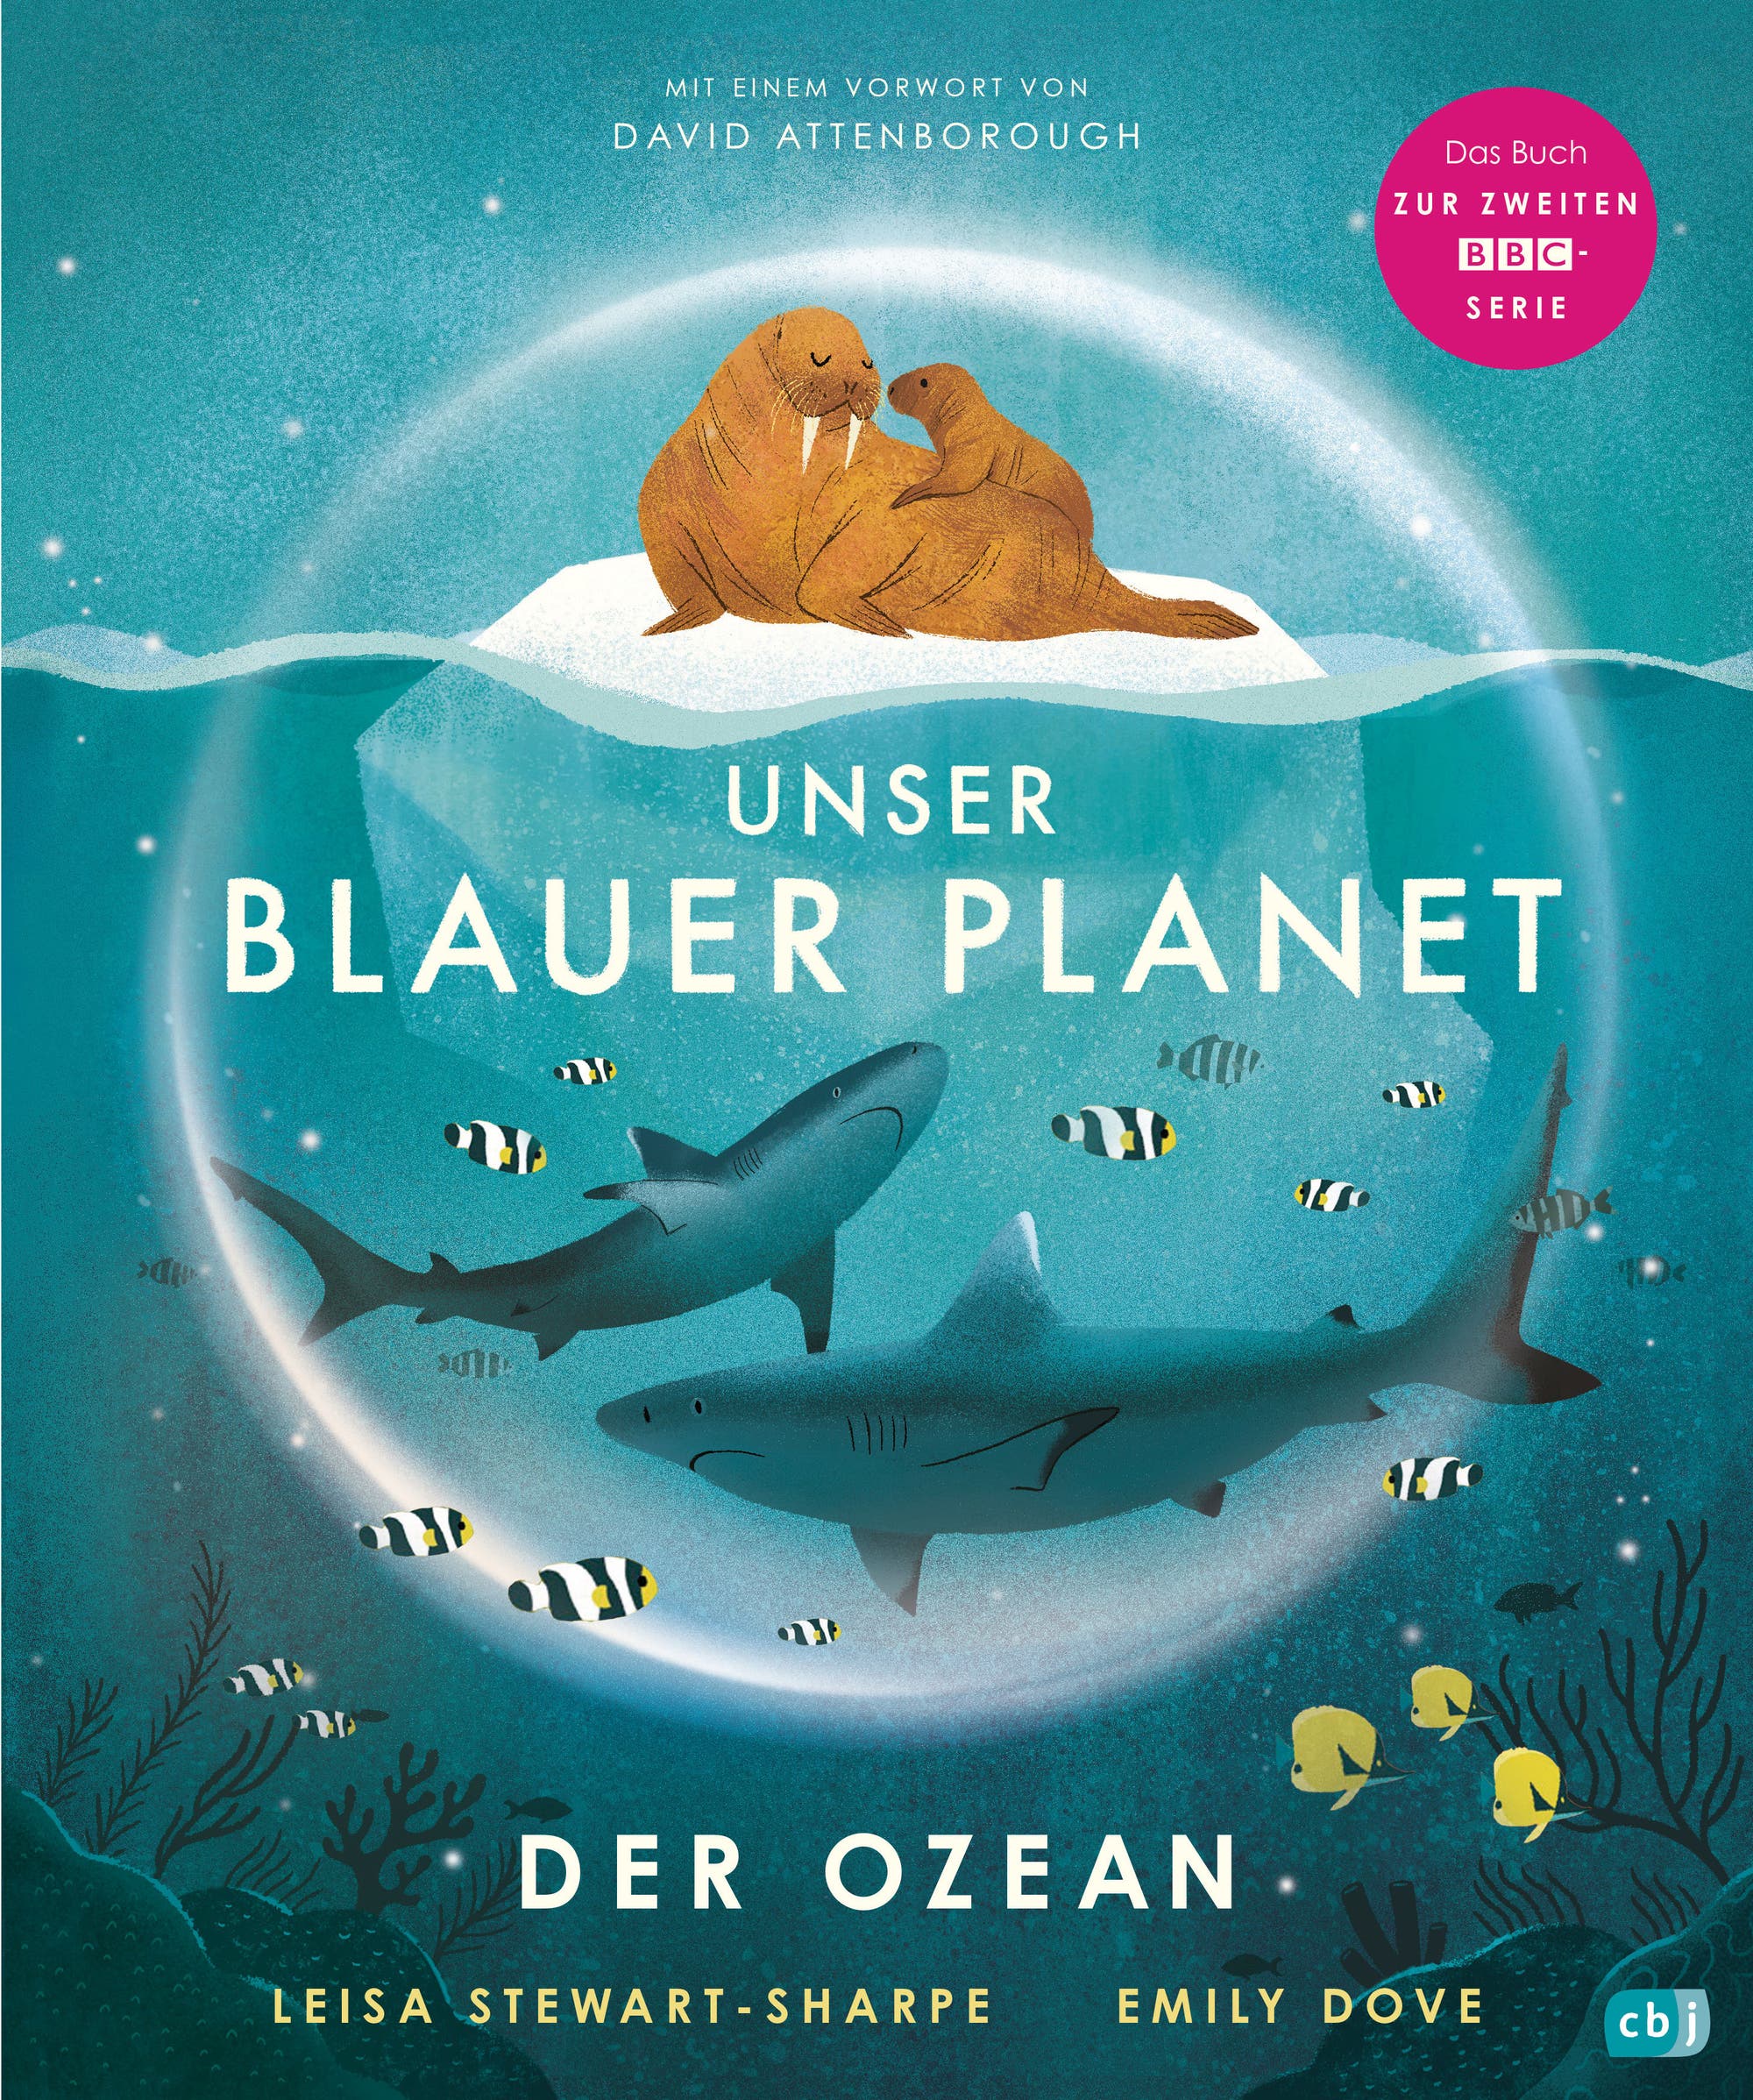 Review of the book "Our Blue Planet - Ocean"